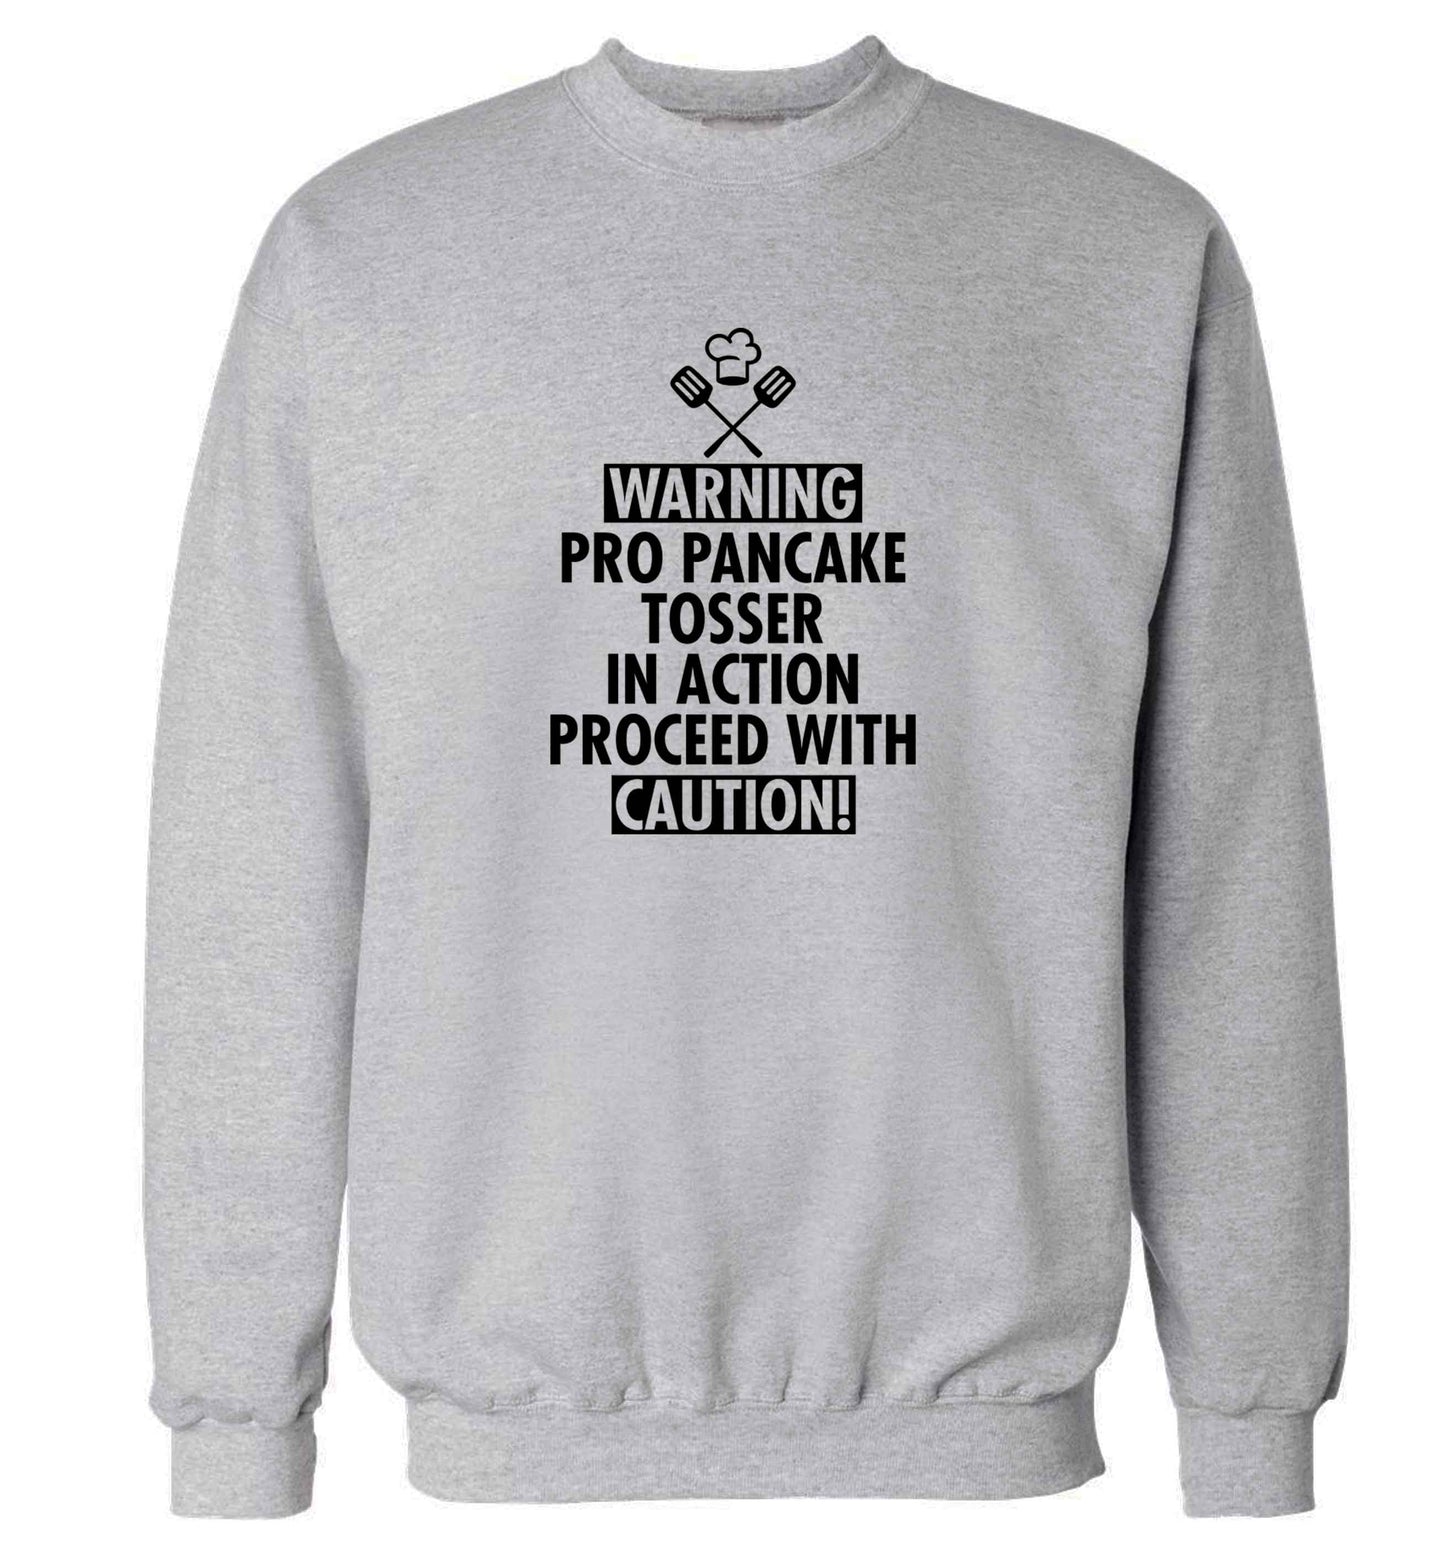 Warning pro pancake tosser in action proceed with caution adult's unisex grey sweater 2XL